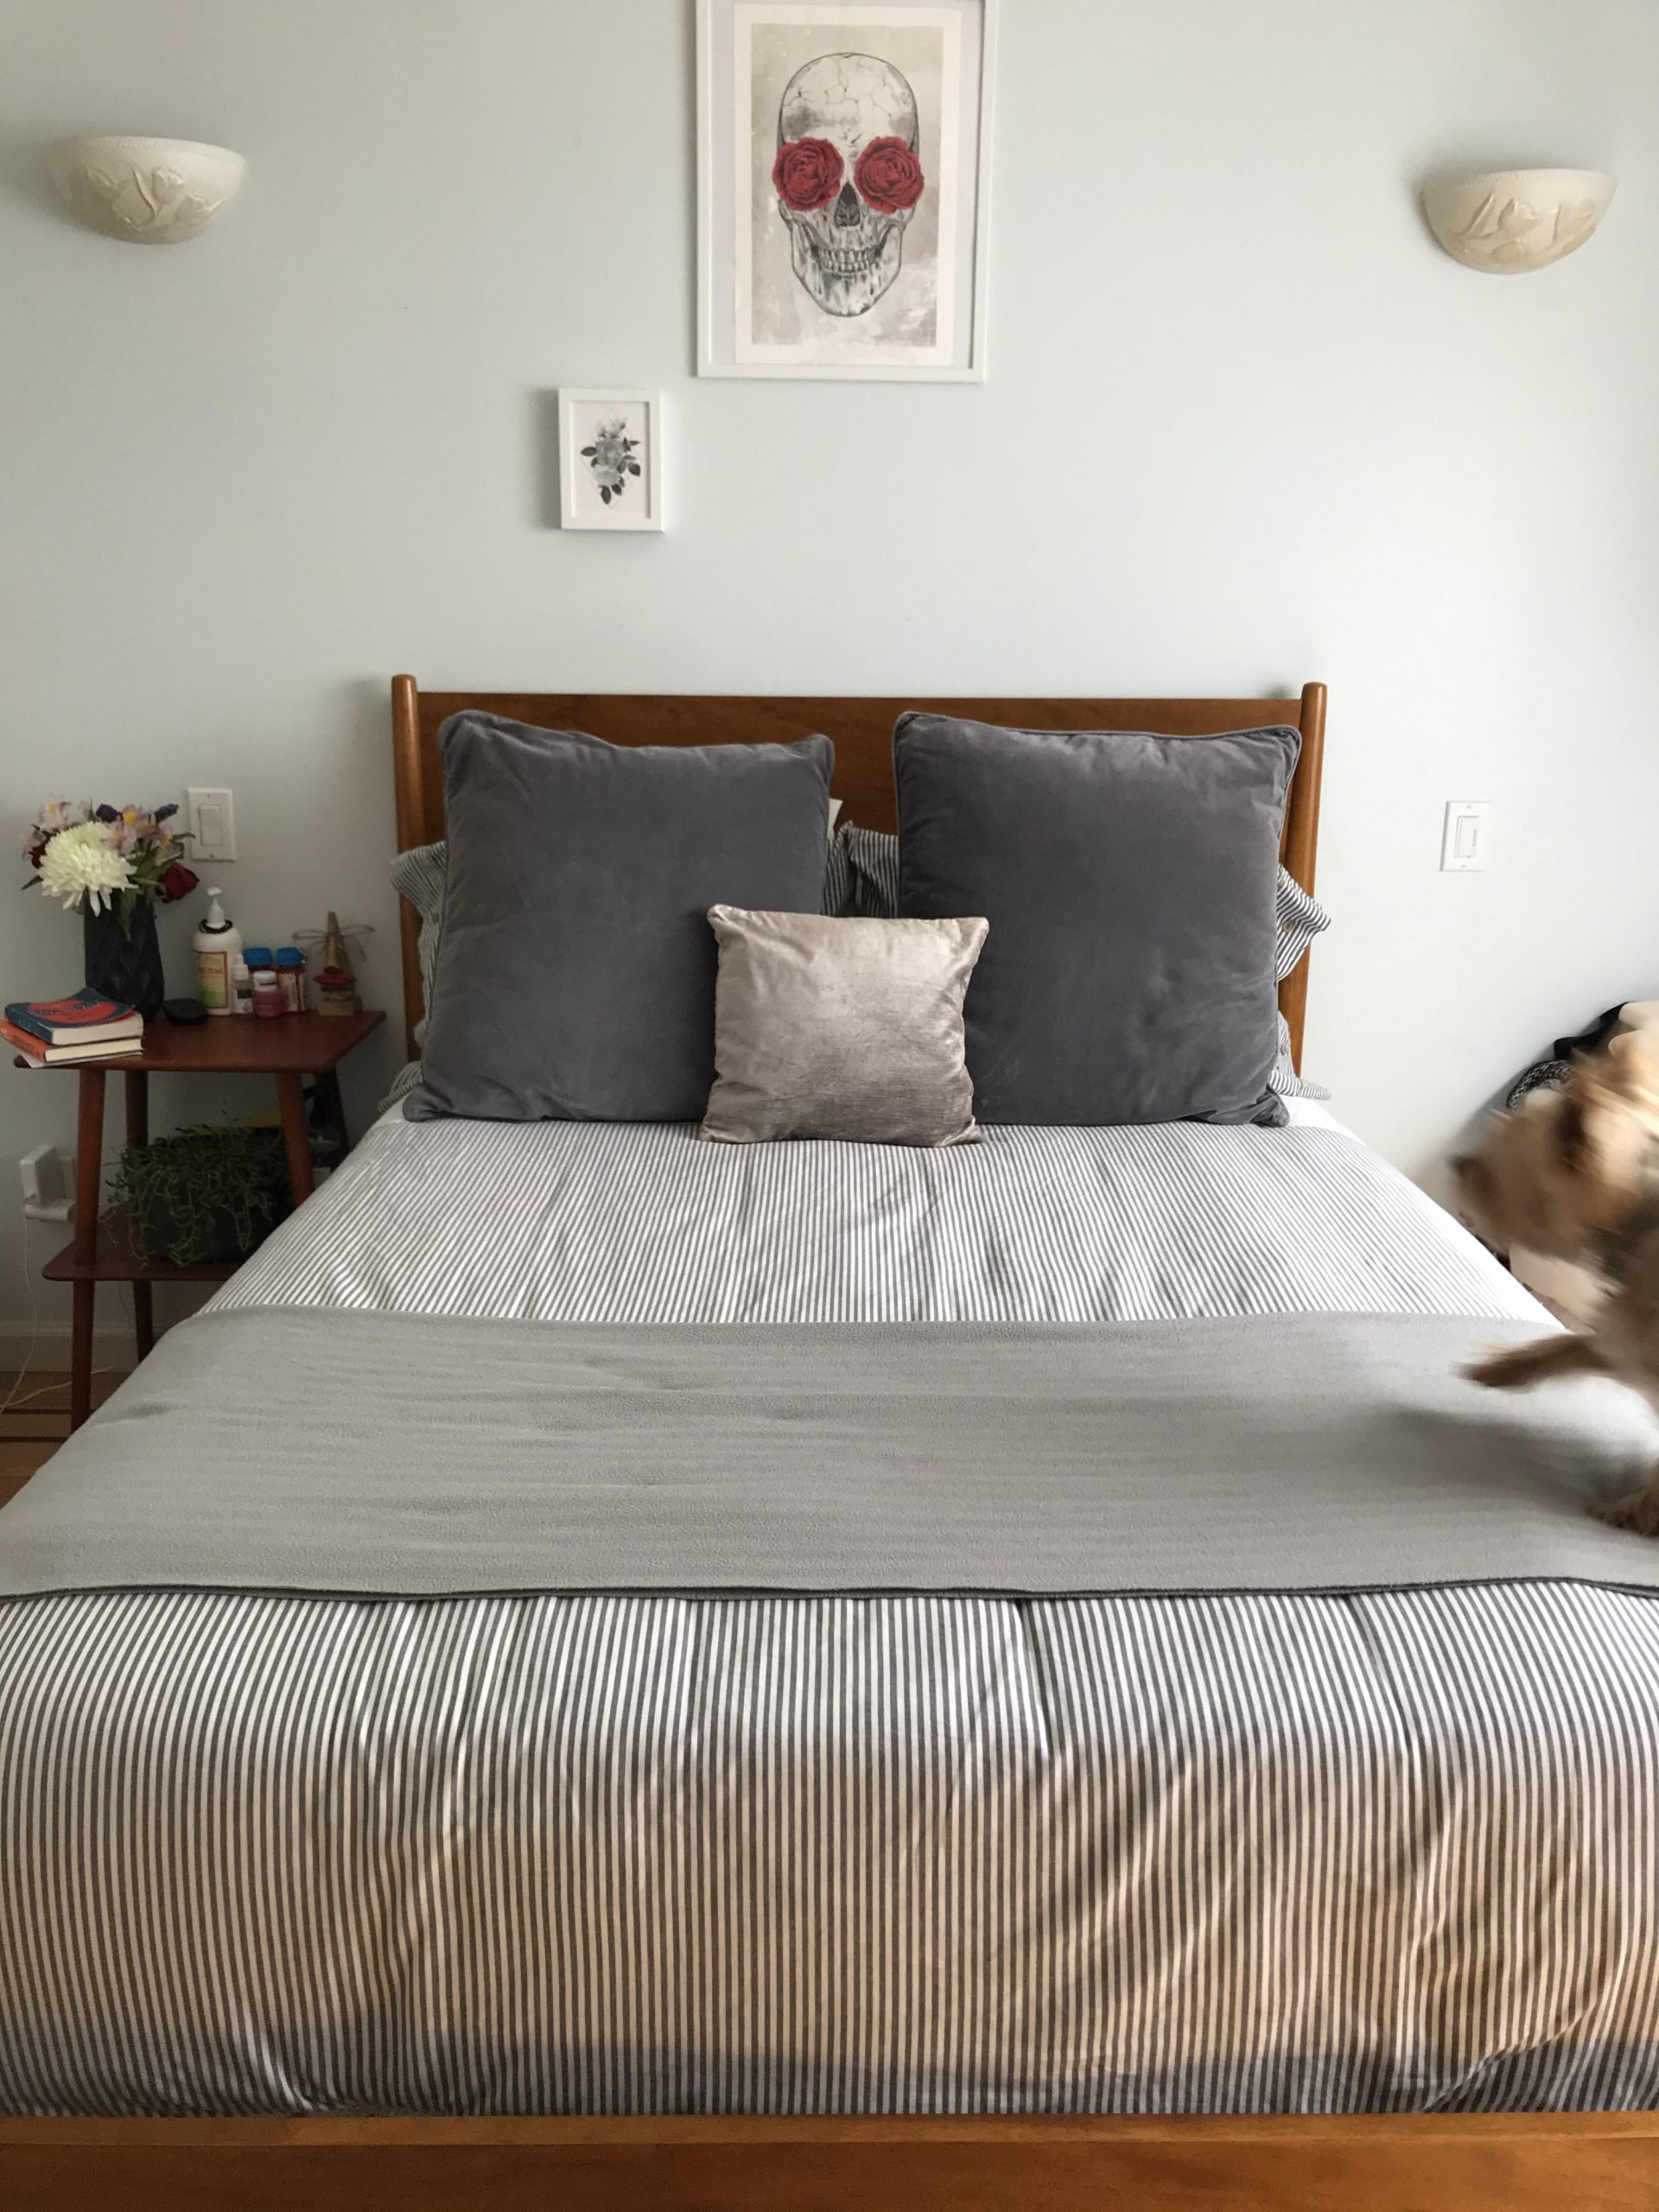 Help me decorate my room. I just bought this new bed frame. I rent so I ...